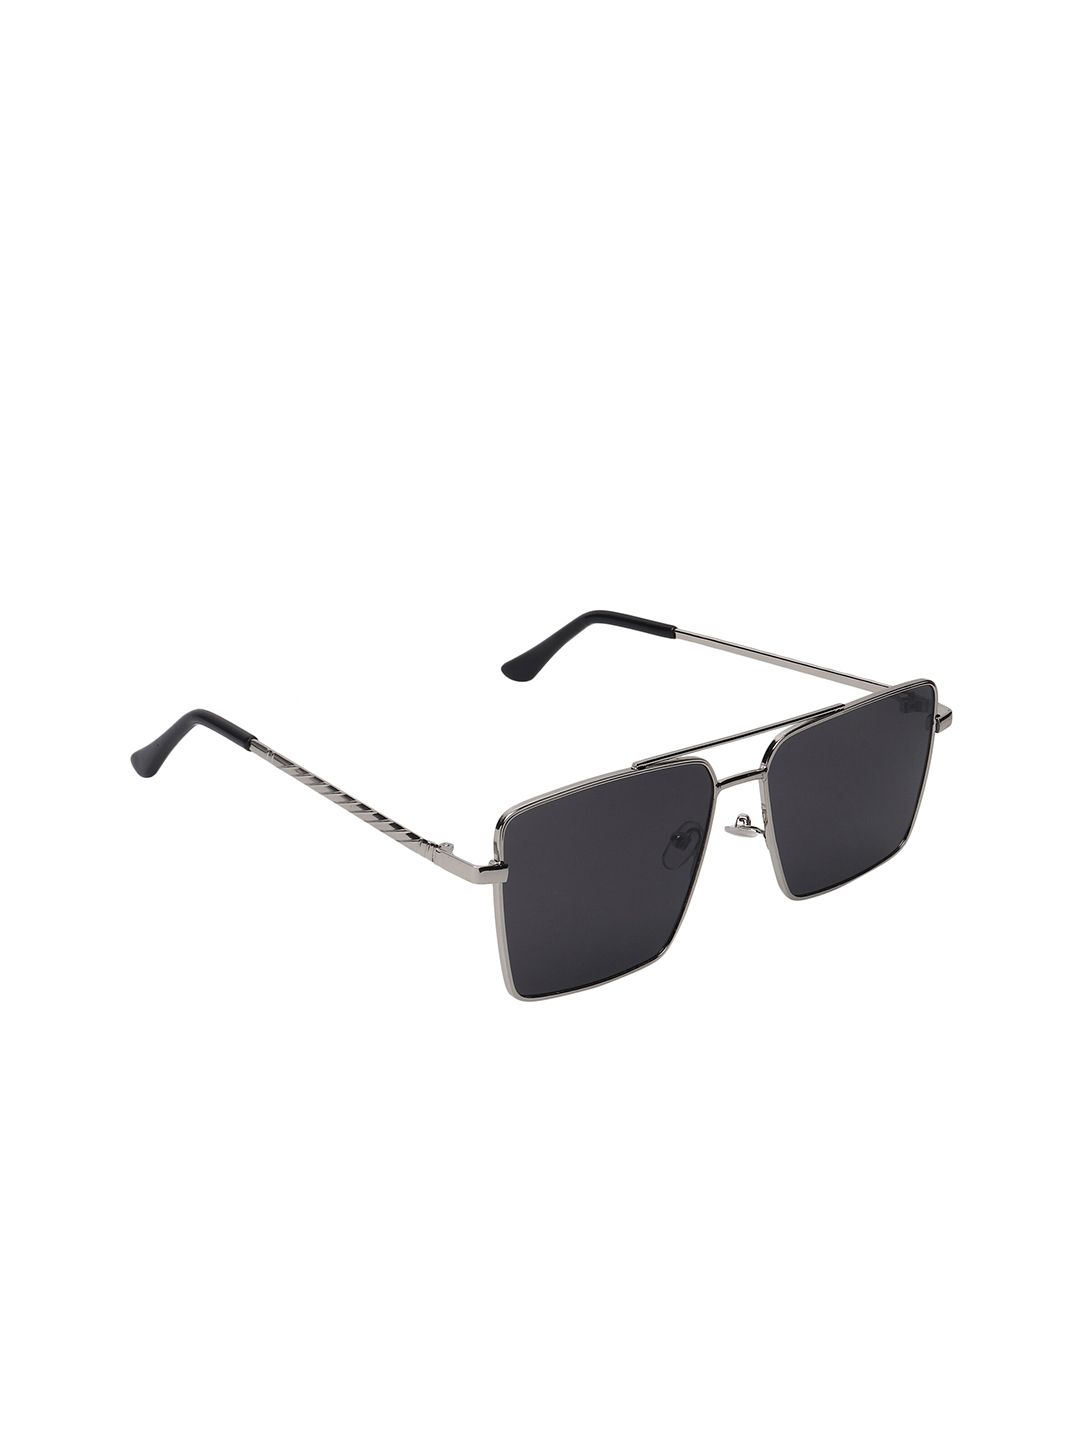 CRIBA Unisex Black Lens & Silver-Toned Wayfarer Sunglasses with UV Protected Lens Price in India